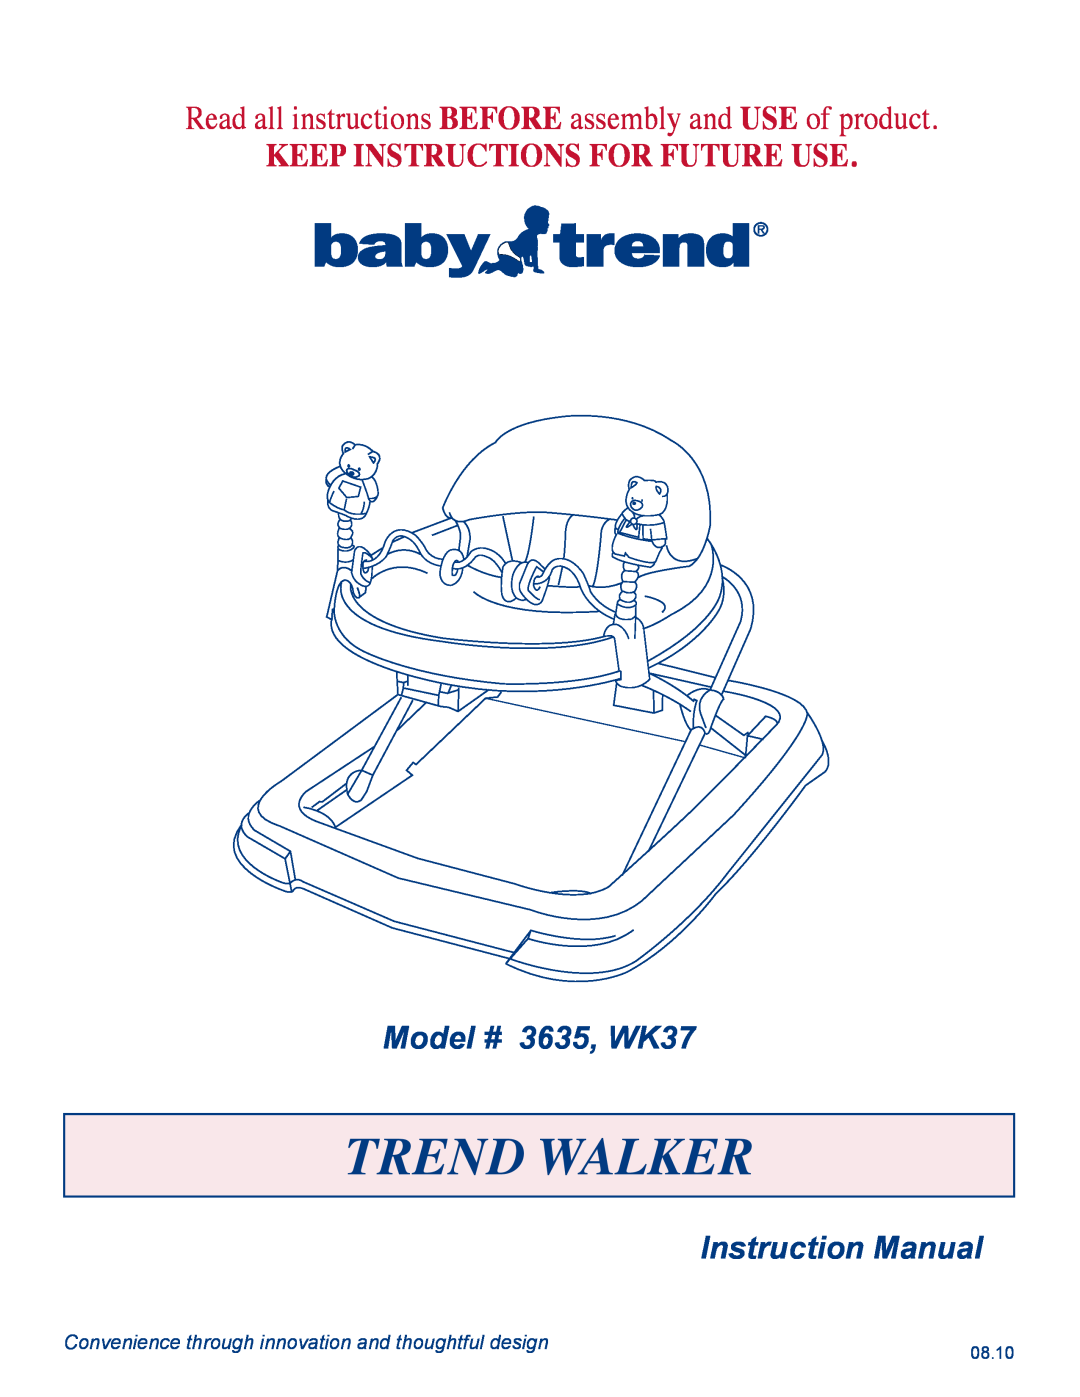 Baby Trend manual Trend Walker, Read all instructions BEFORE assembly and USE of product, Model # 3635, WK37, 08.10 